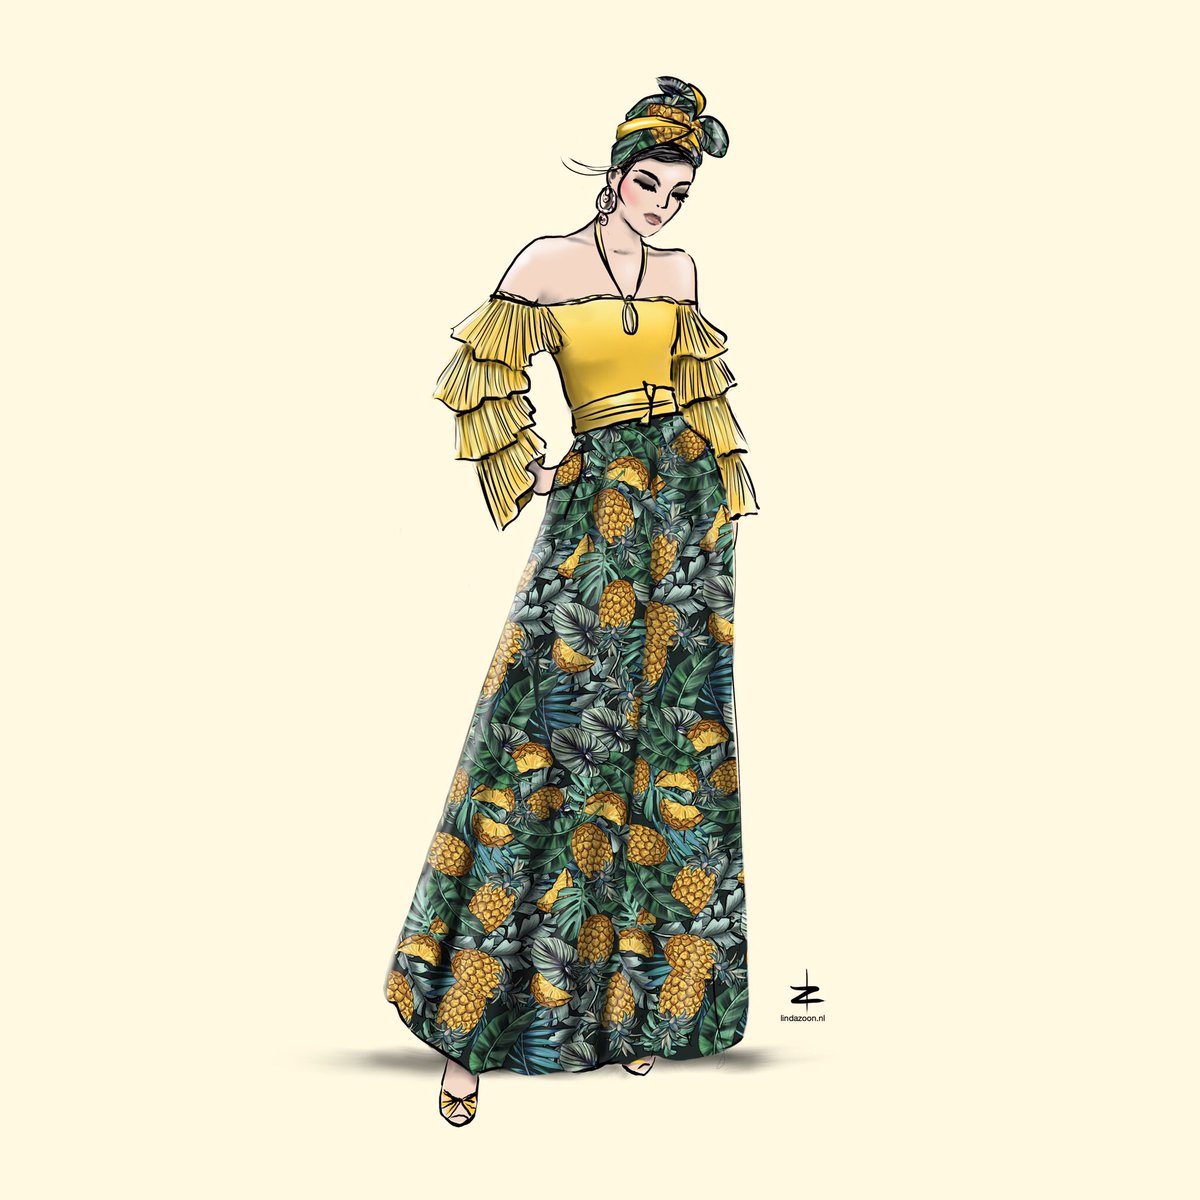 “Be a #pineapple : stand tall, wear a crown., and be sweet on the inside” 🍍#summerinspiration #Summervibe🌞 💛 Let’s #vogue this summer #summeroutfit #beachwear #fashionable #readytowear  drawing by #lindazoon #artstudio #fashionart #hoogstraat #hoogkwartier #rotterdam